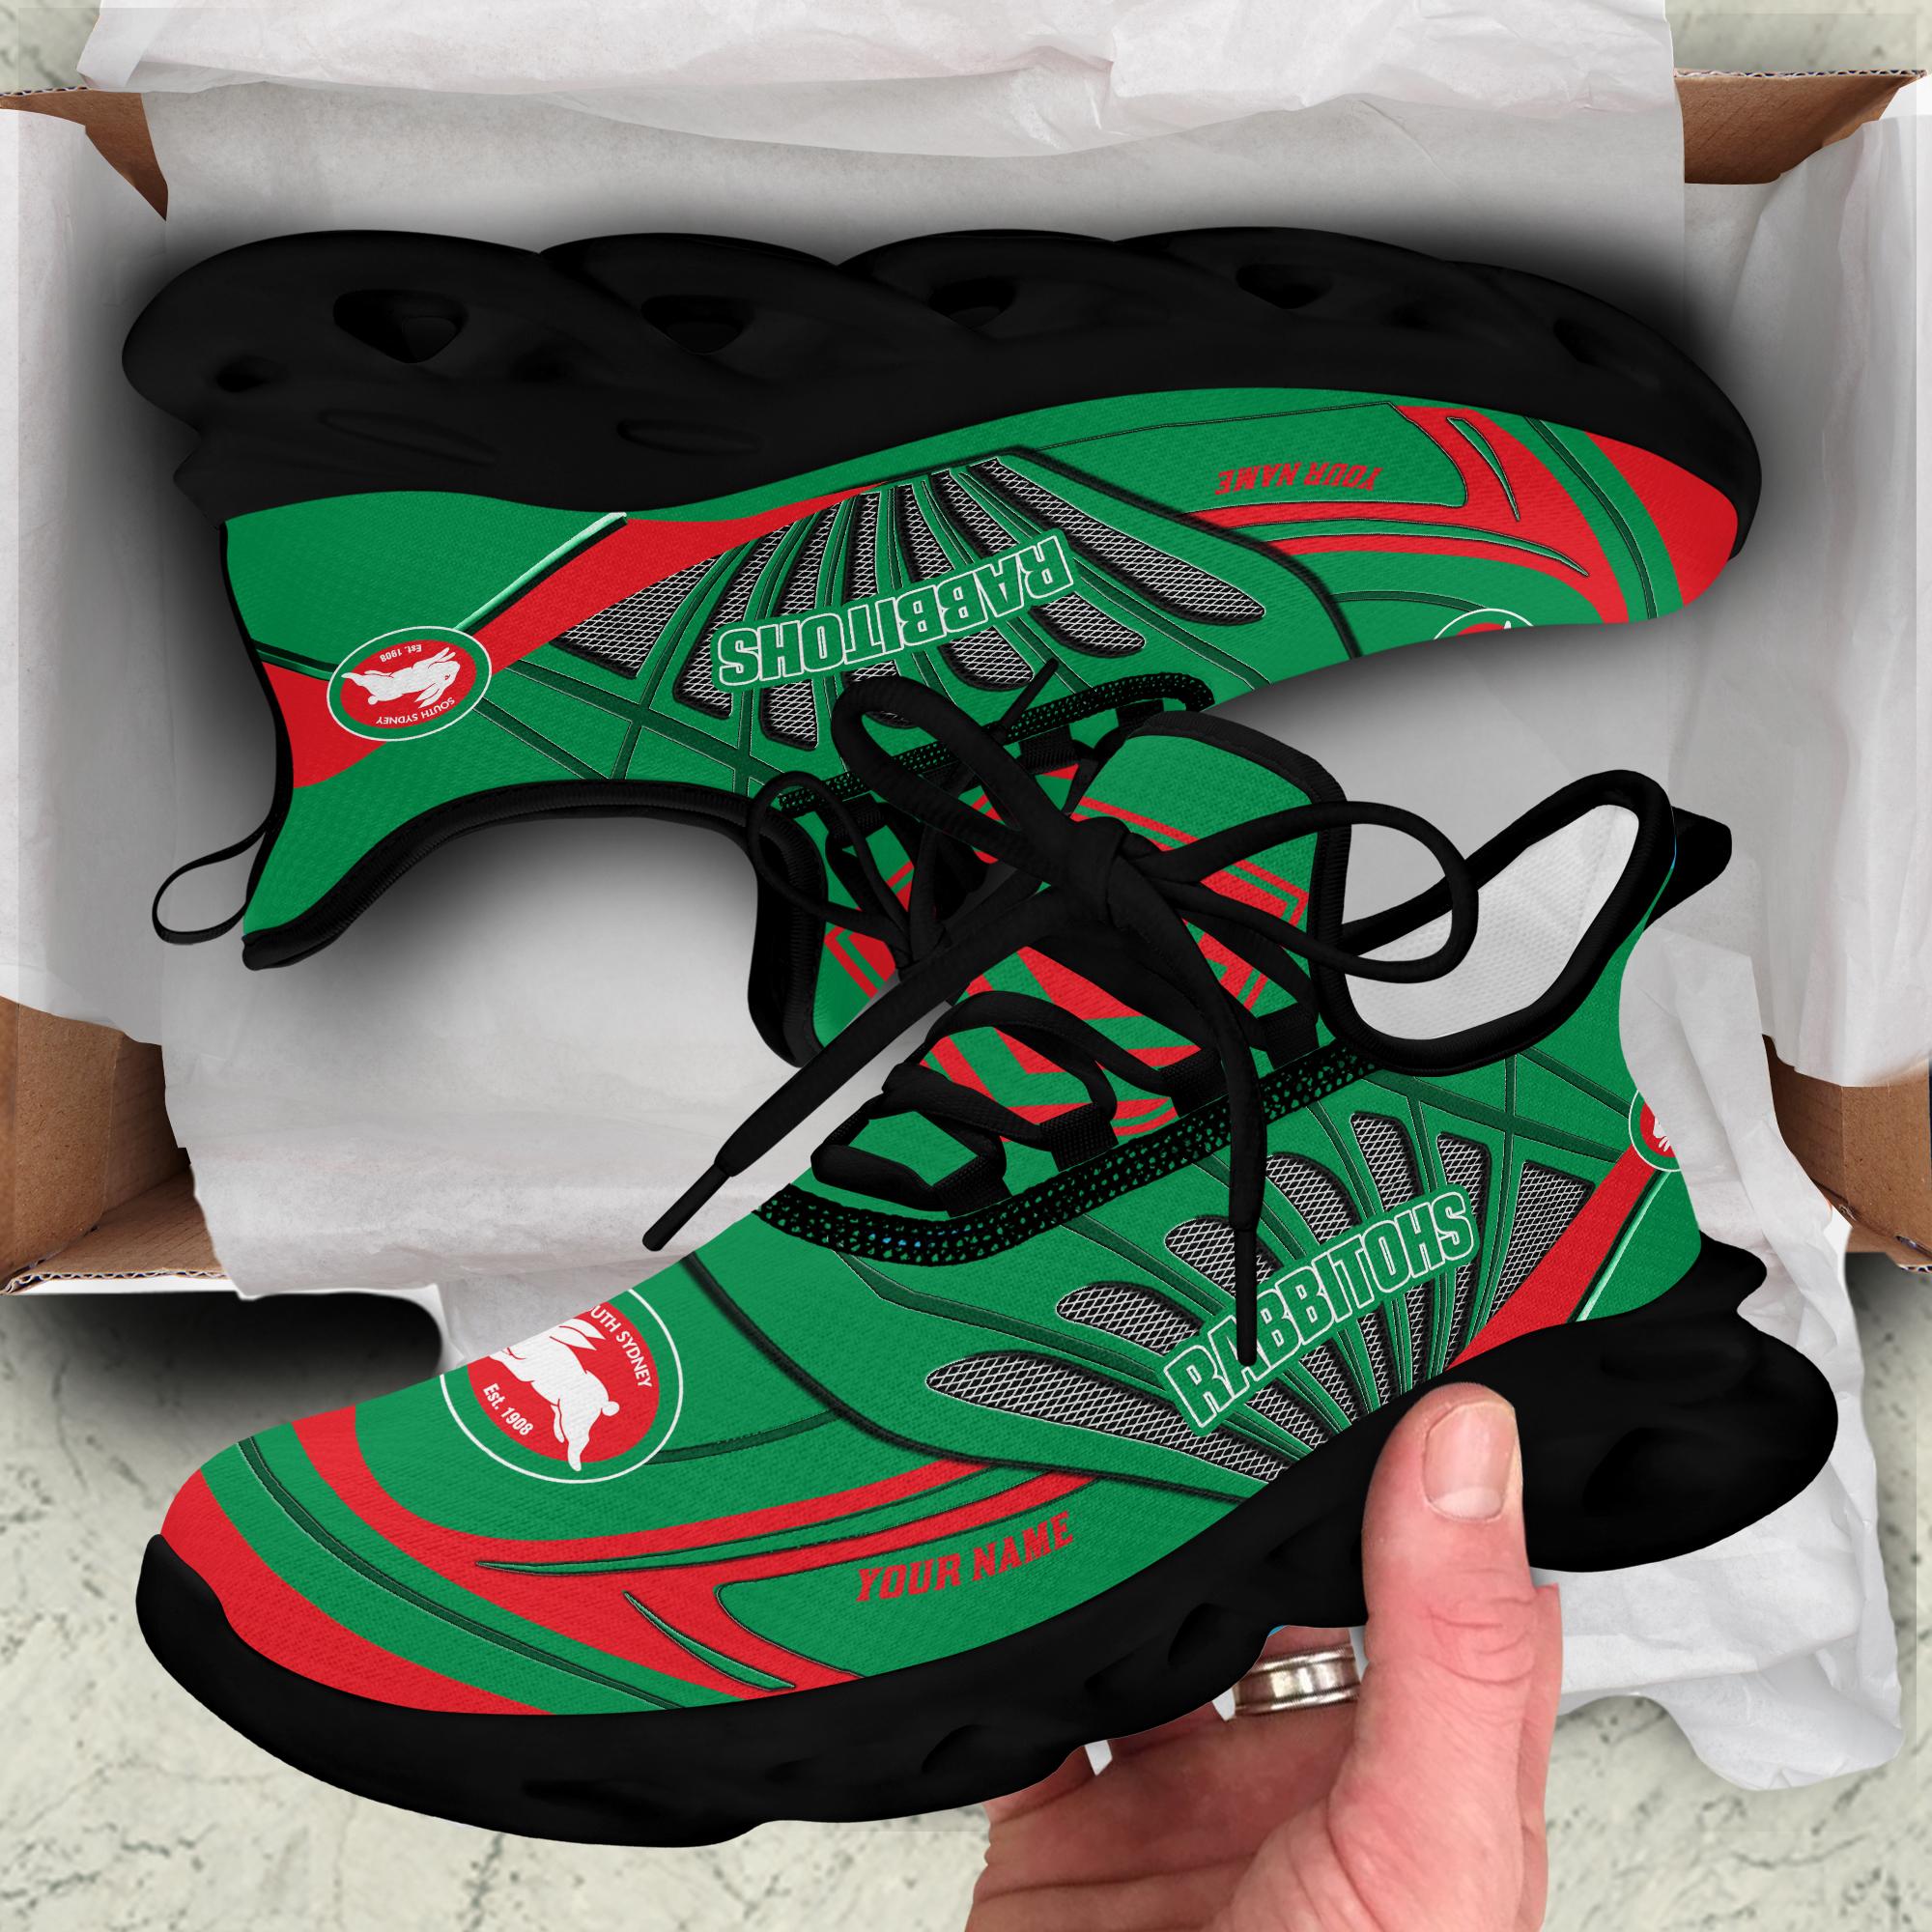 South Sydney Rabbitohs NRL Custom Name Clunky Max Soul Shoes